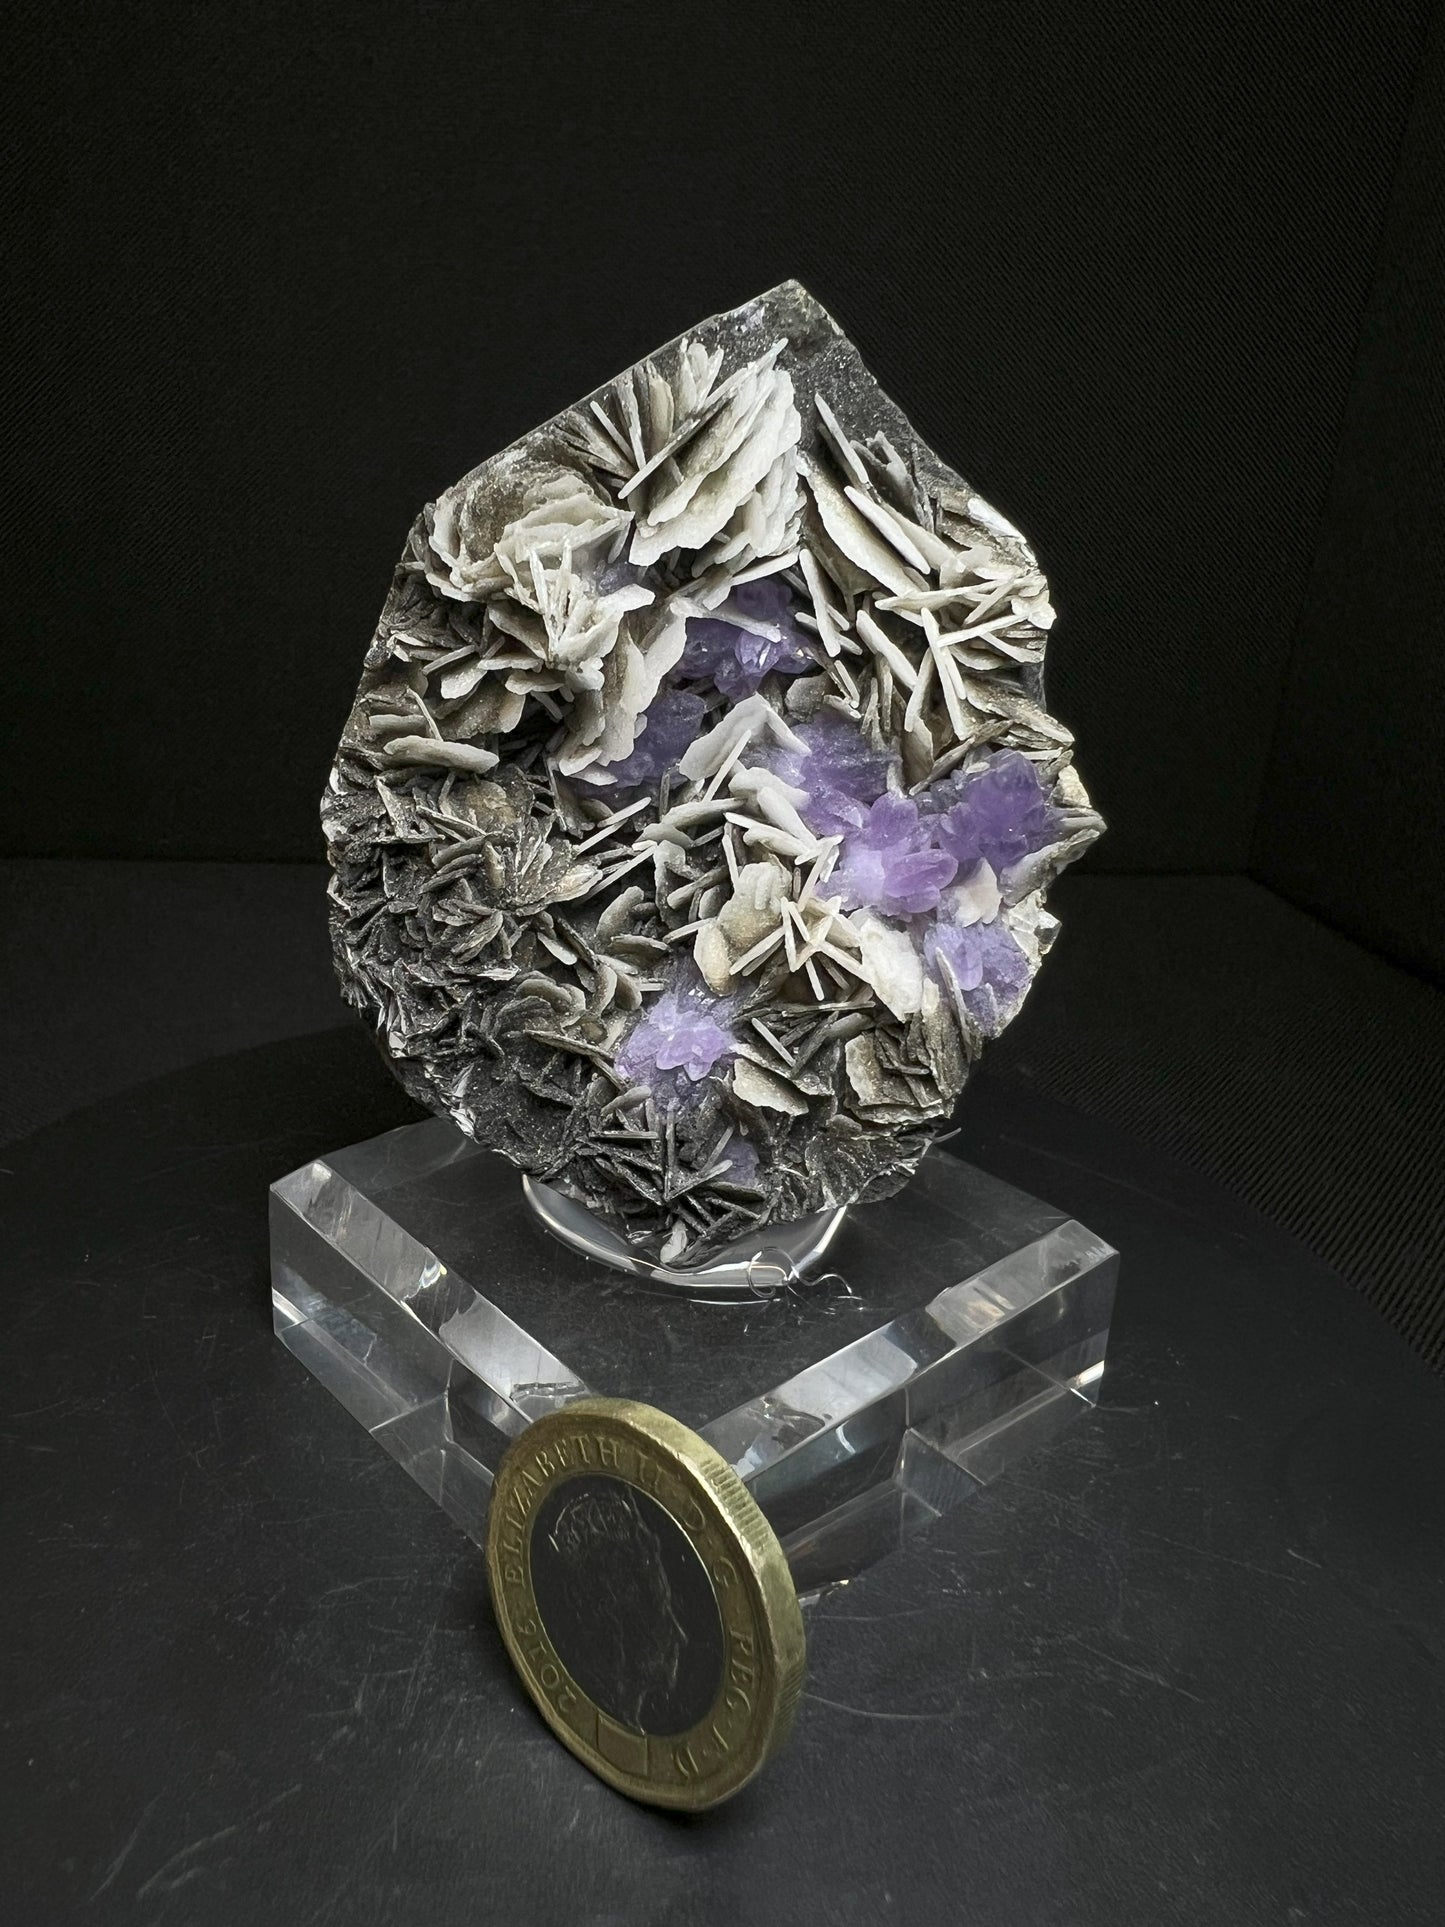 Outstanding Stunning Flower Amethyst On Baryte With Chalcedony Geode From Karur District Tamil Nadu India